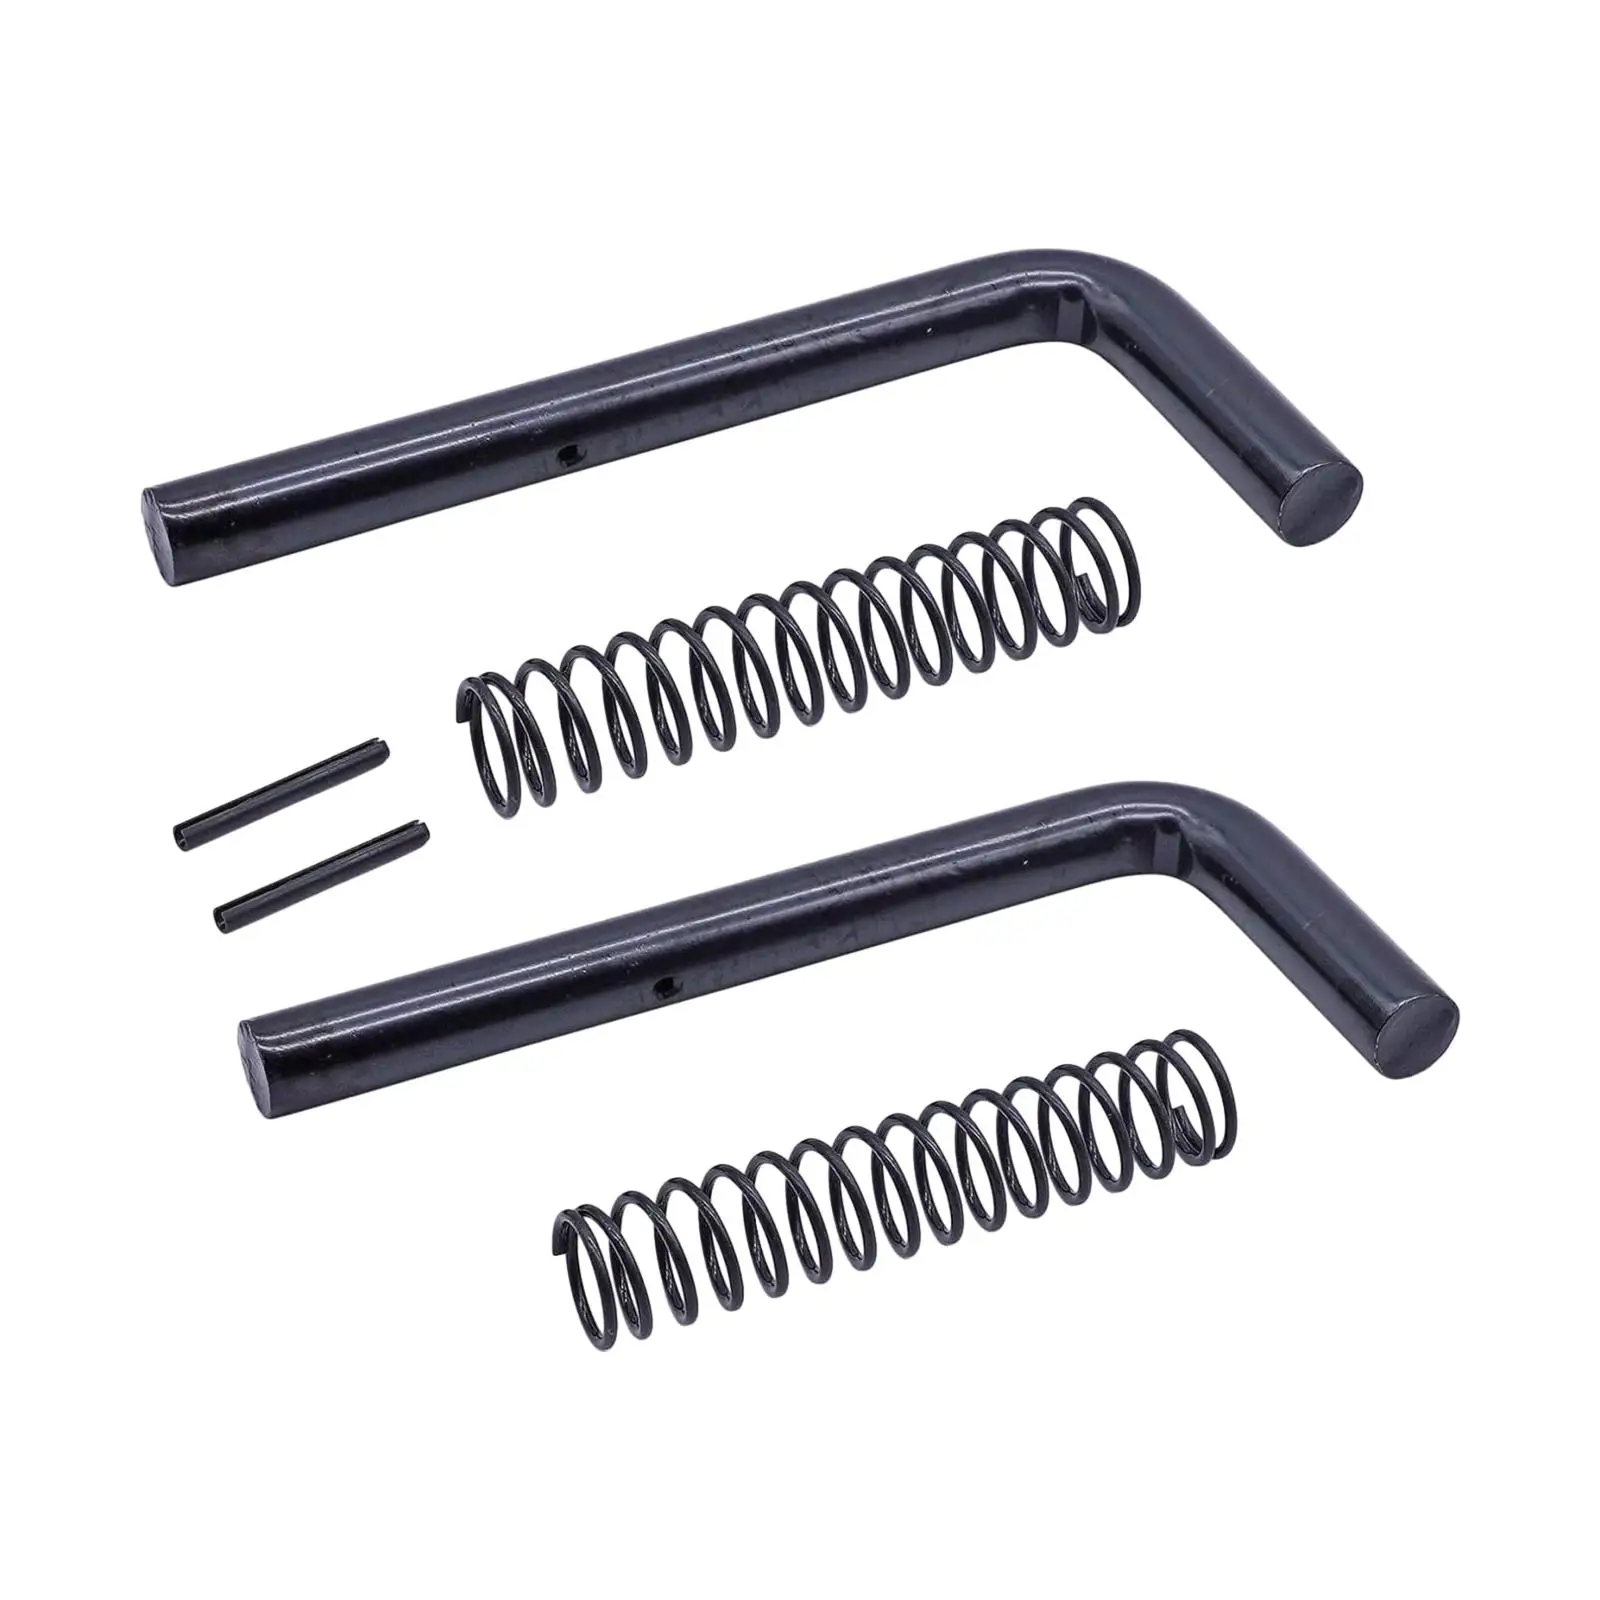 2x Trailer Gate Spring Latch Repair Kit Replacement for Carry on Repair